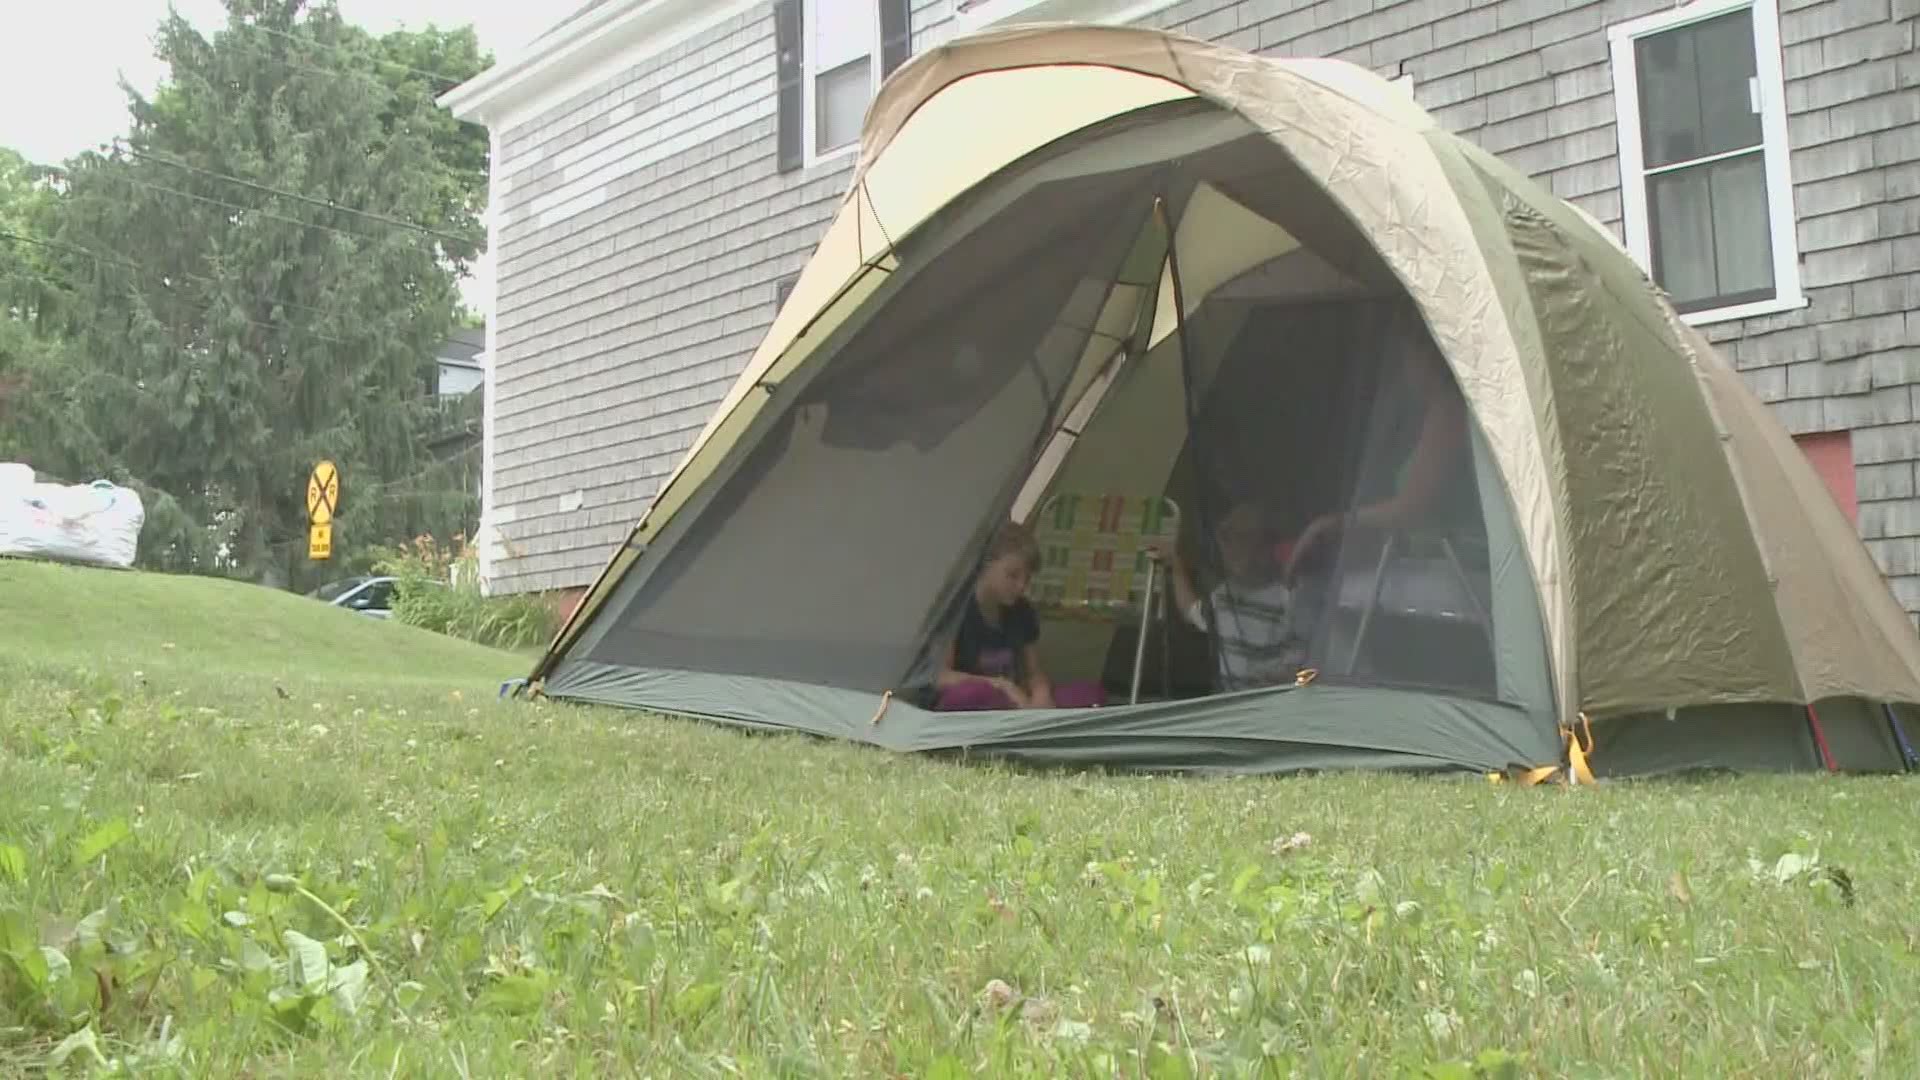 Hundreds of Maine families plan to camp out at same time as part of first ever Maine Backyard Campout